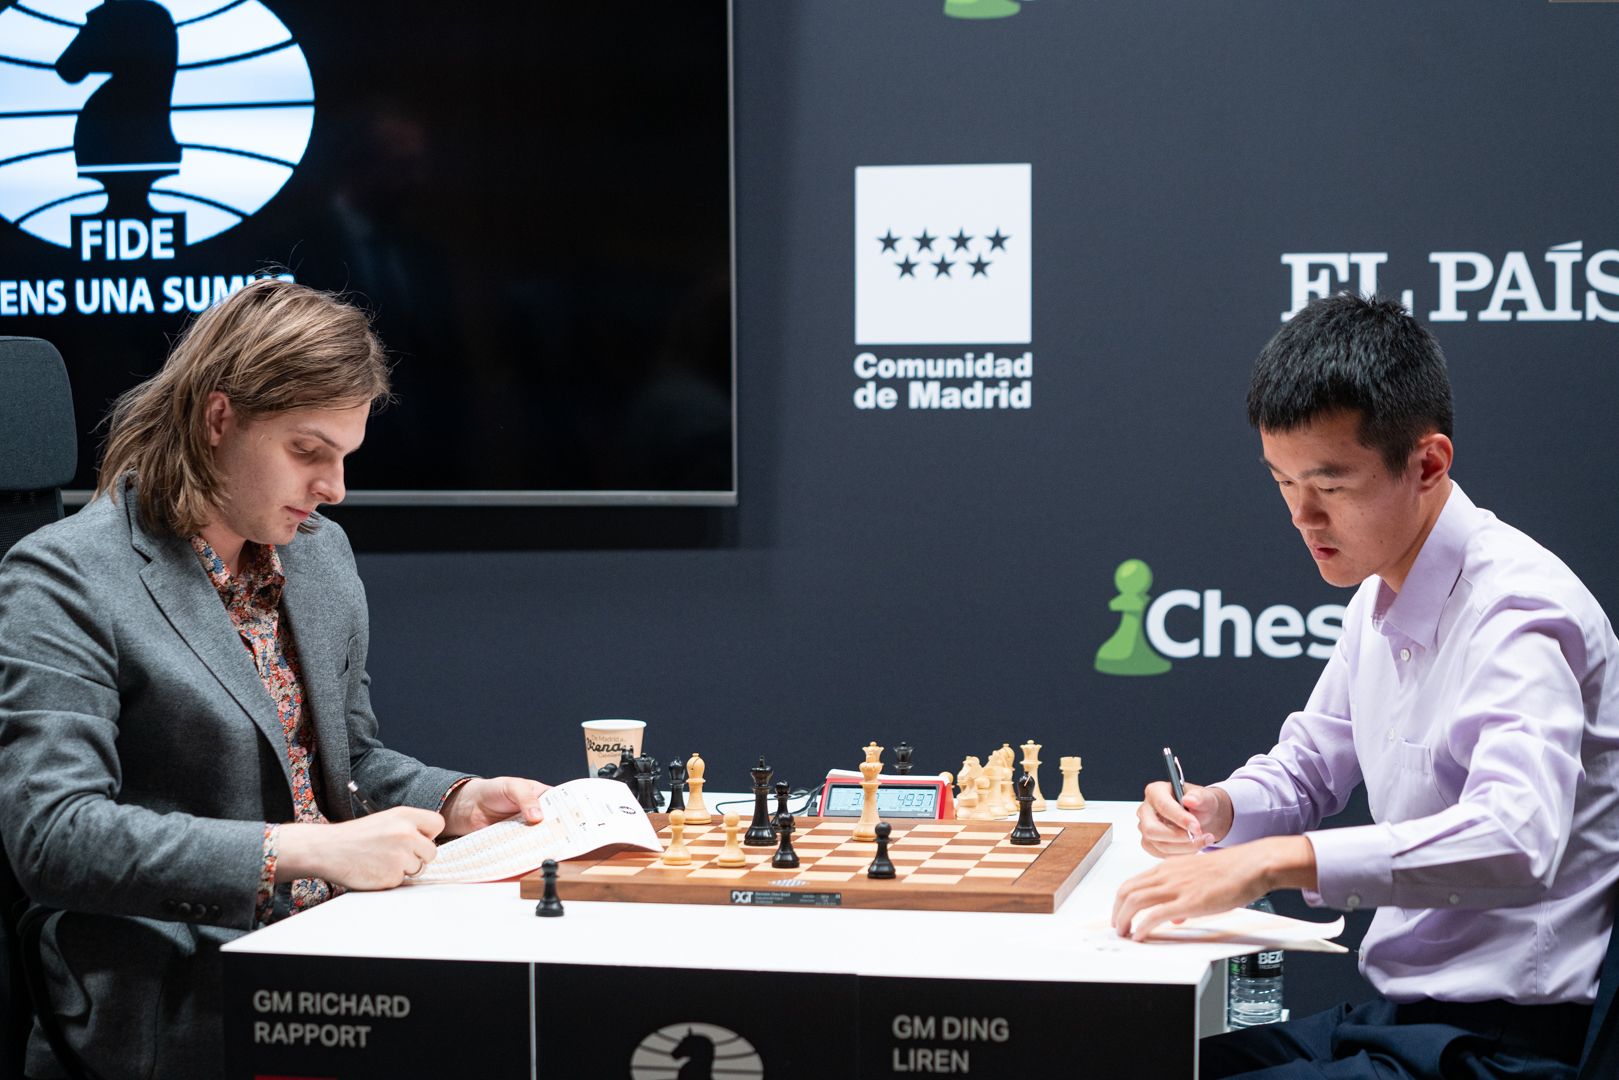 2022 Candidates Tournament  Hikaru Nakamura shakes up the tournament:  Standings and clashes for the 9th round